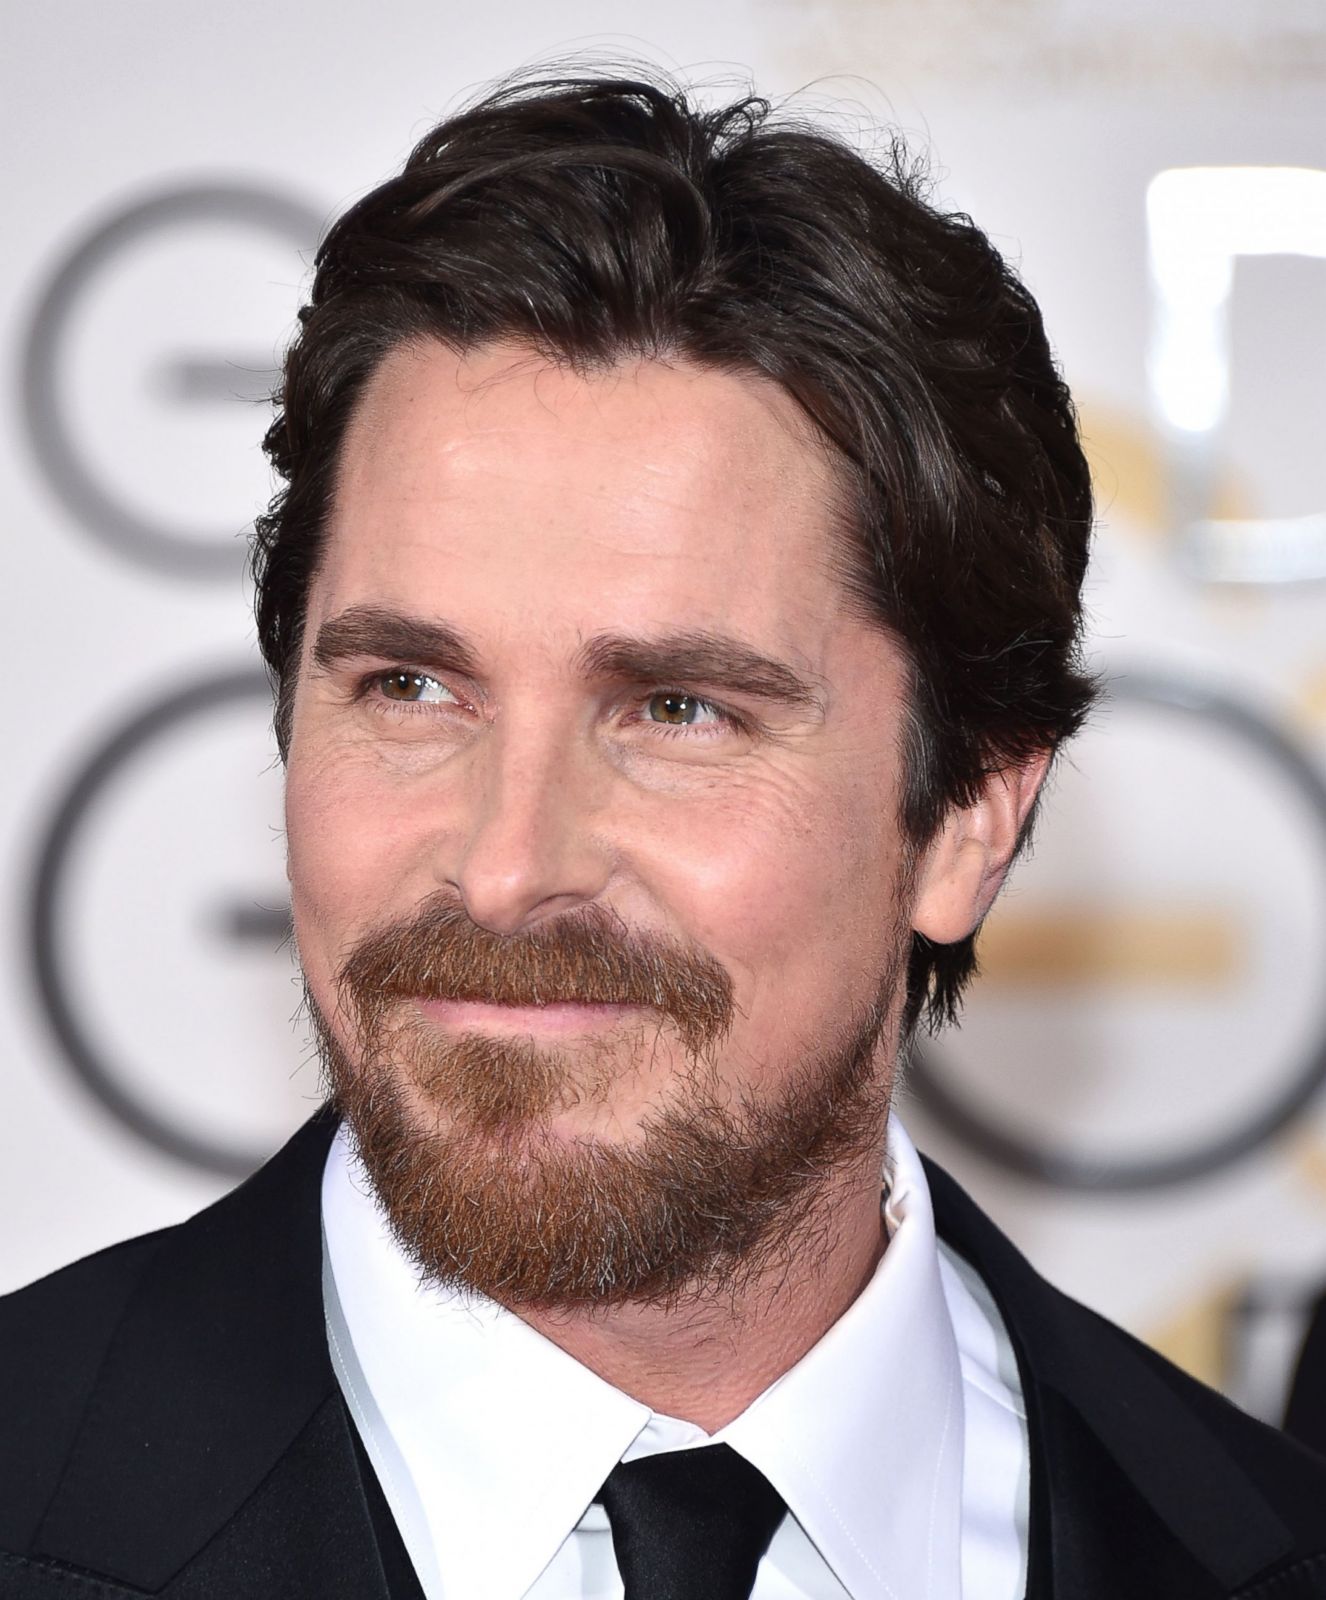 View Christian Bale attends the 73rd Annual Golden Globe Awards, Jan. 